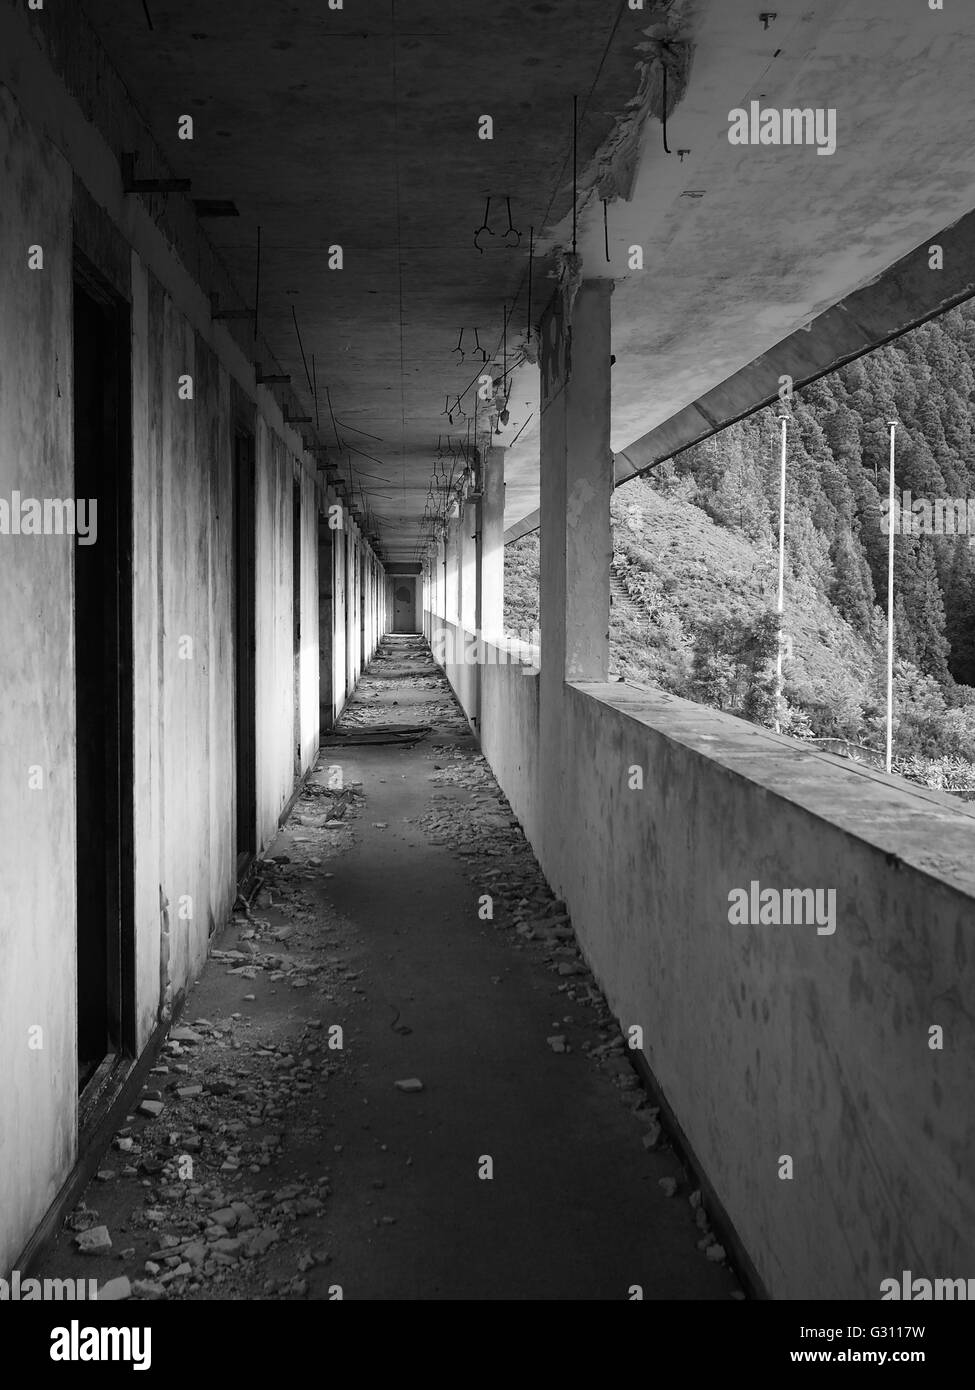 Black and white image of an abandoned building corridor Stock Photo